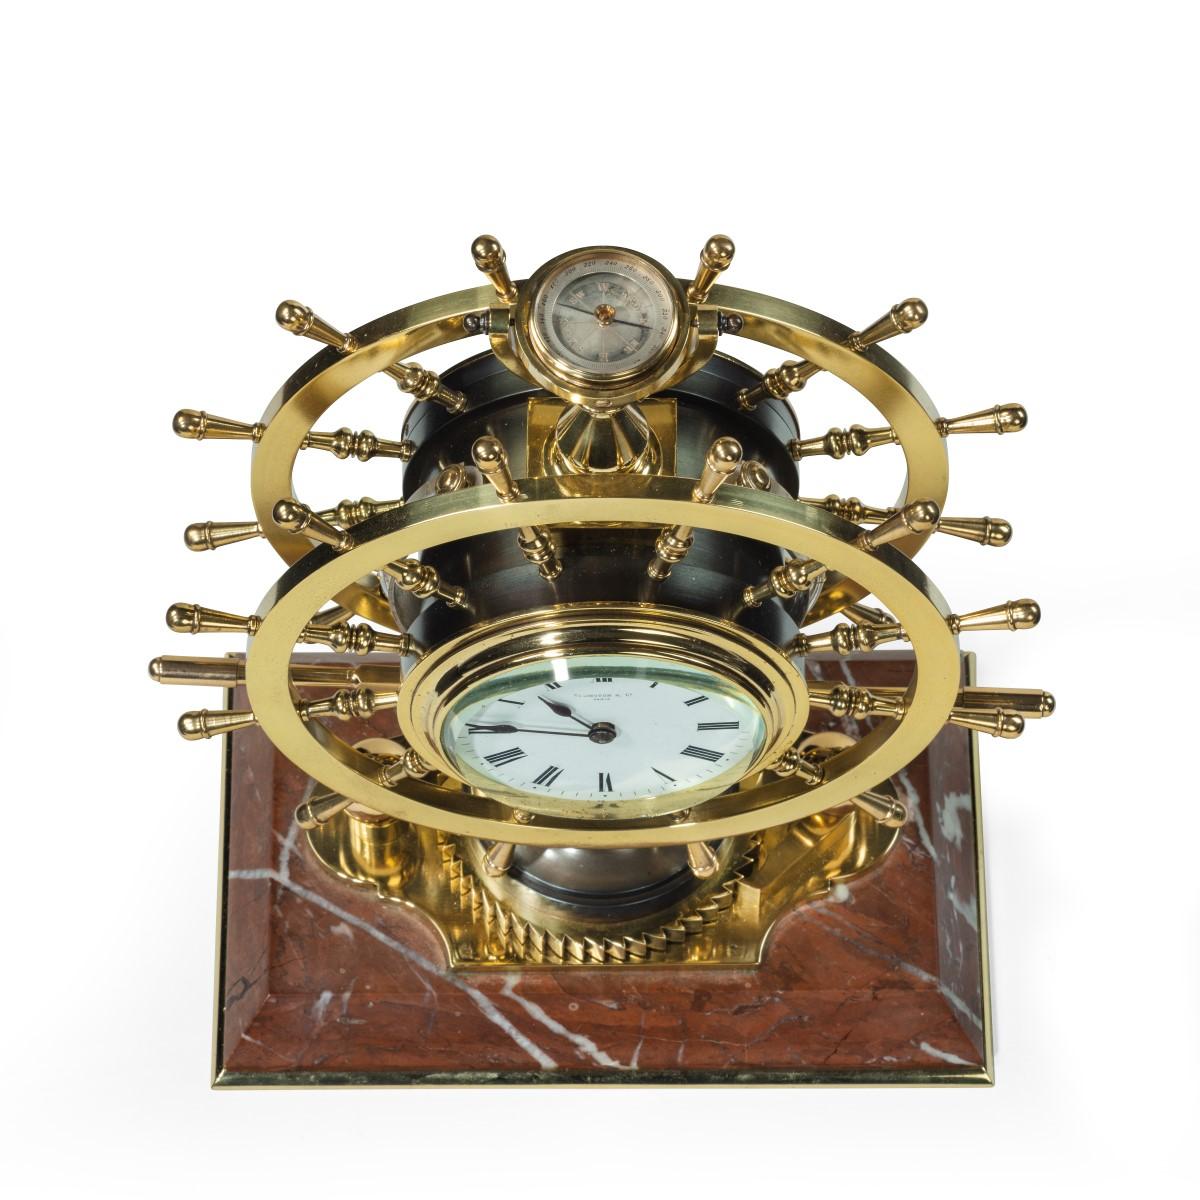 A Victorian brass novelty clock by Elkington & Co., in the form of a double steering-wheel, one wheel enclosing a clock and the other a barometer, with two additional Fahrenheit thermometers attached to the curved sides, all surmounted by a